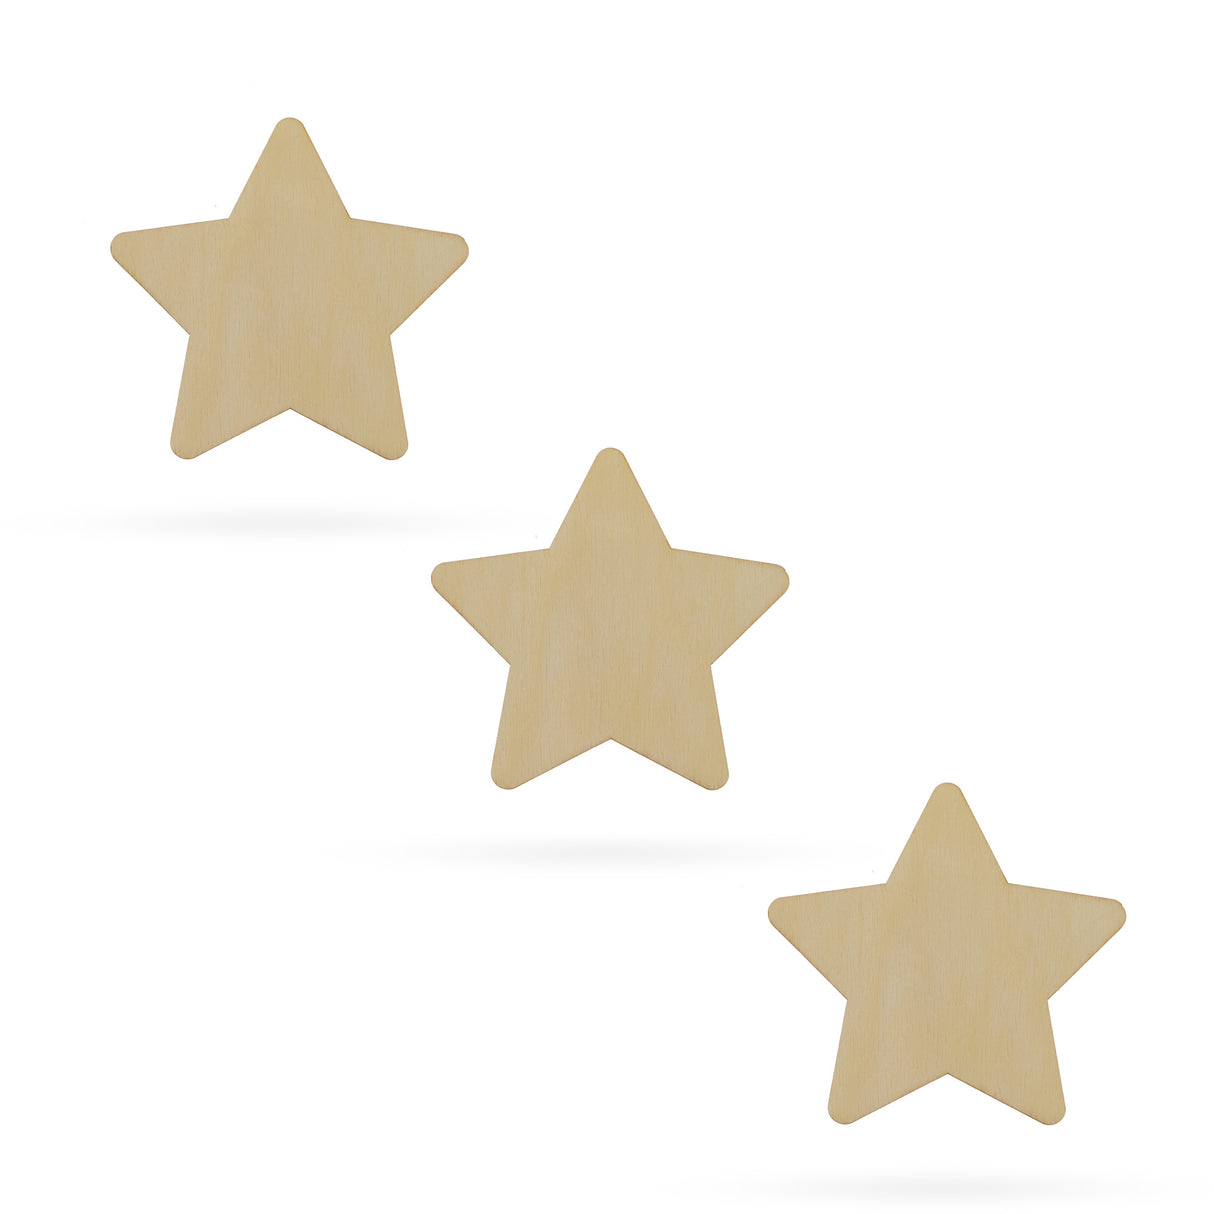 Wood 3 Stars Unfinished Wooden Shapes Craft Cutouts DIY Unpainted 3D Plaques 4 Inches in Beige color Star